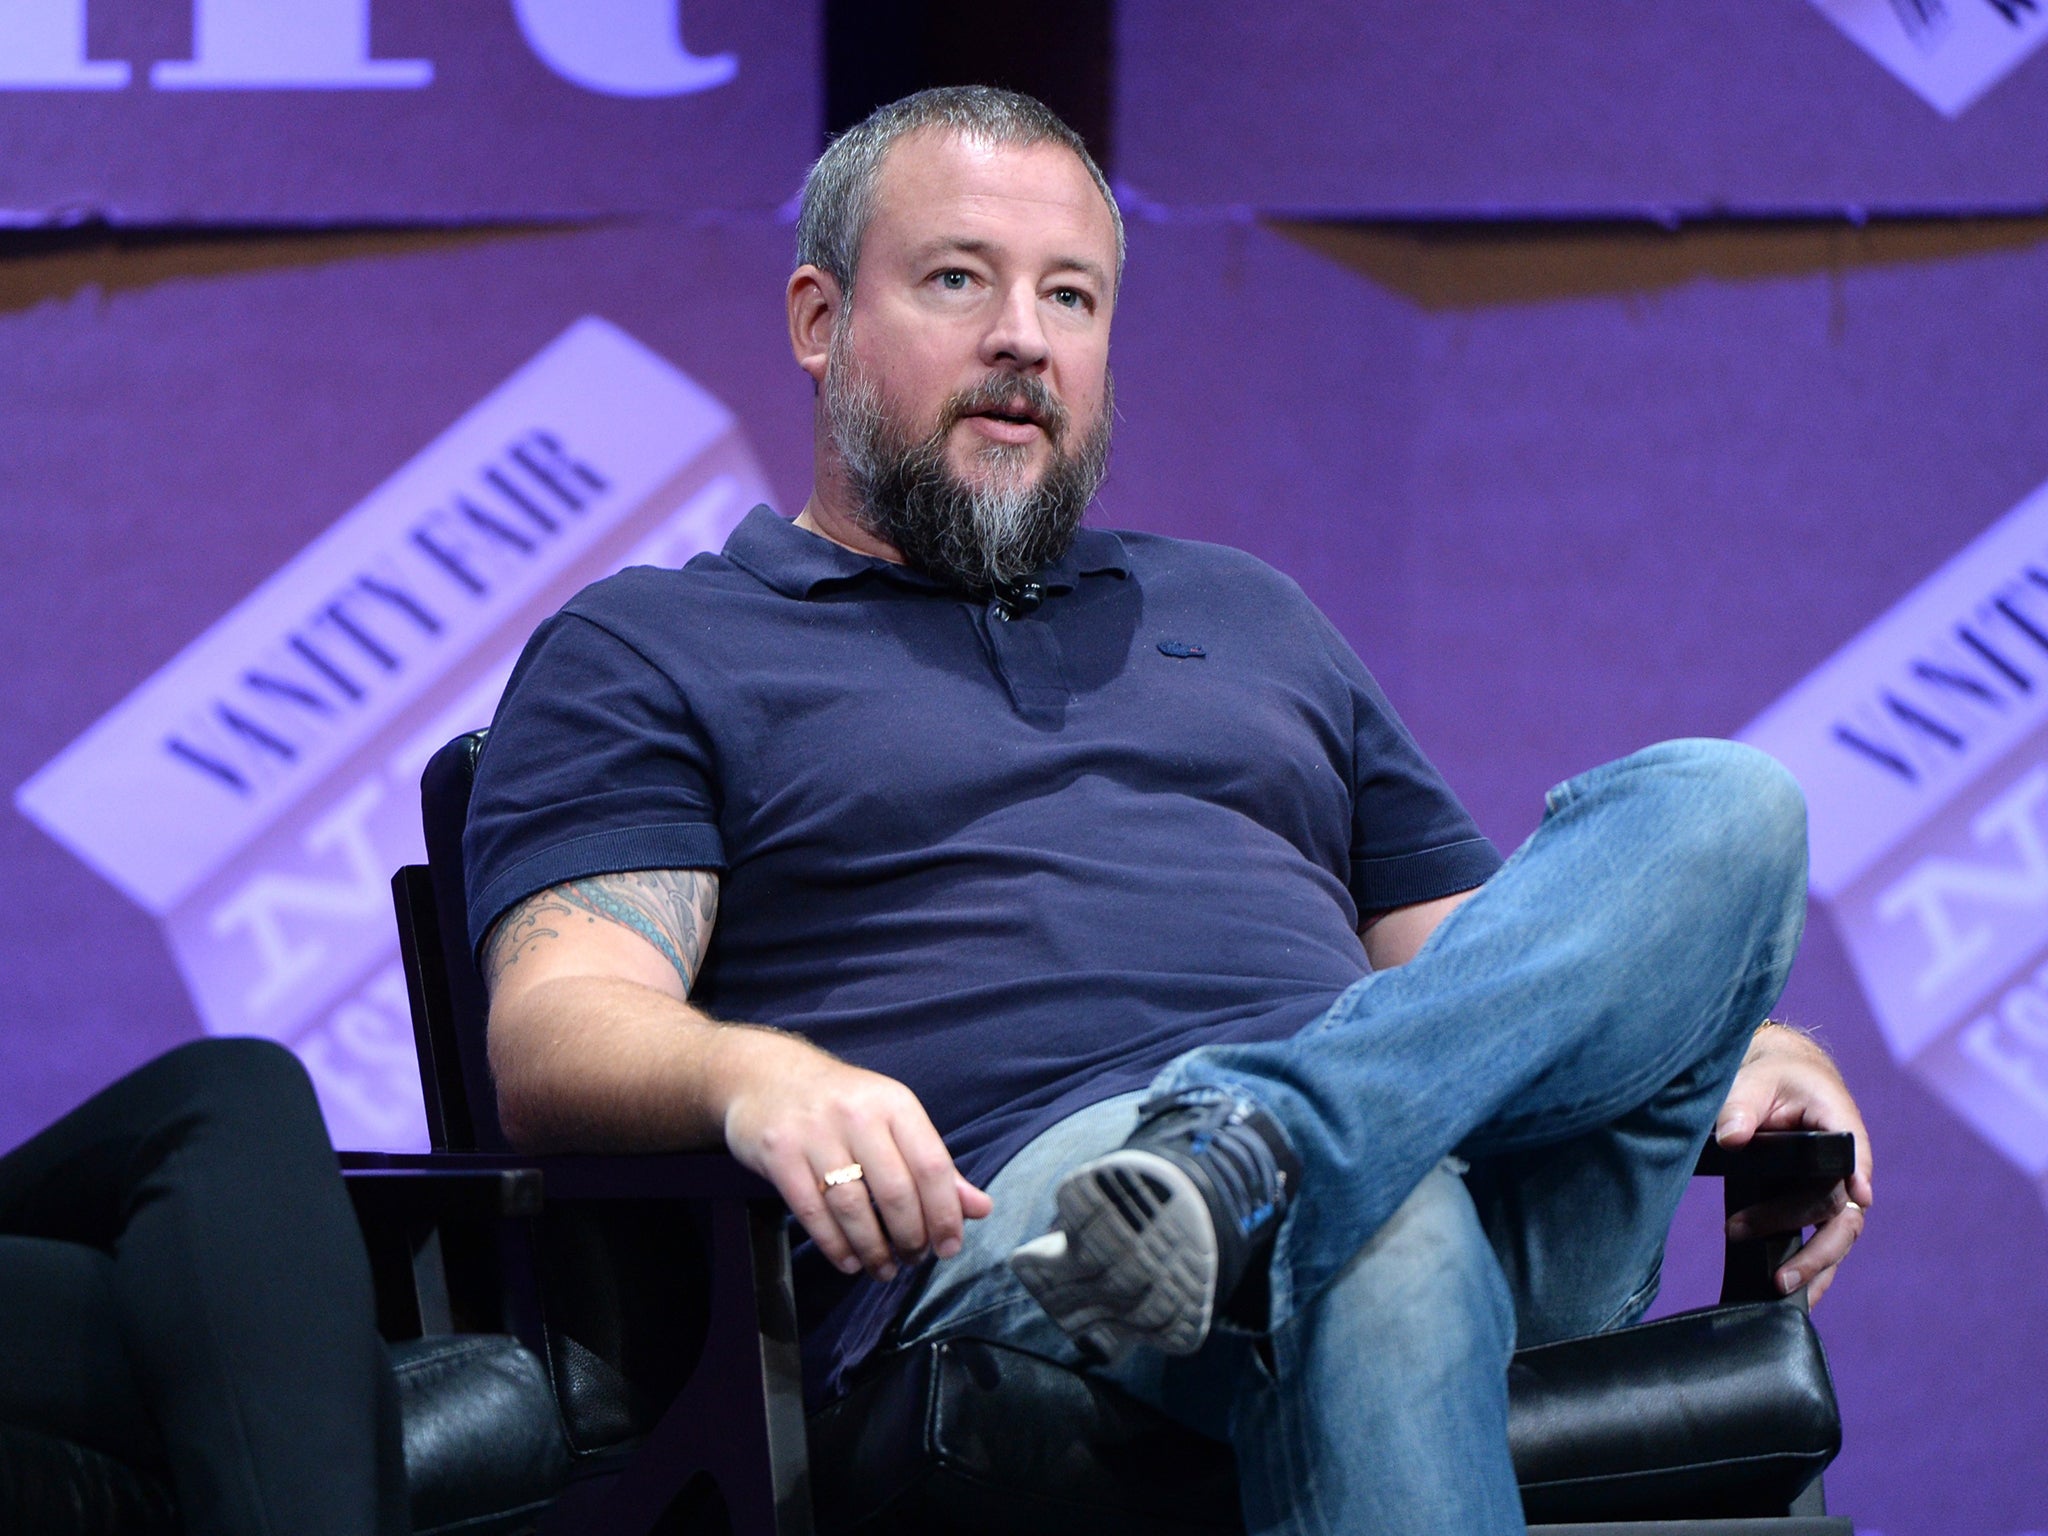 Shane Smith founded Vice in Montreal in 1994